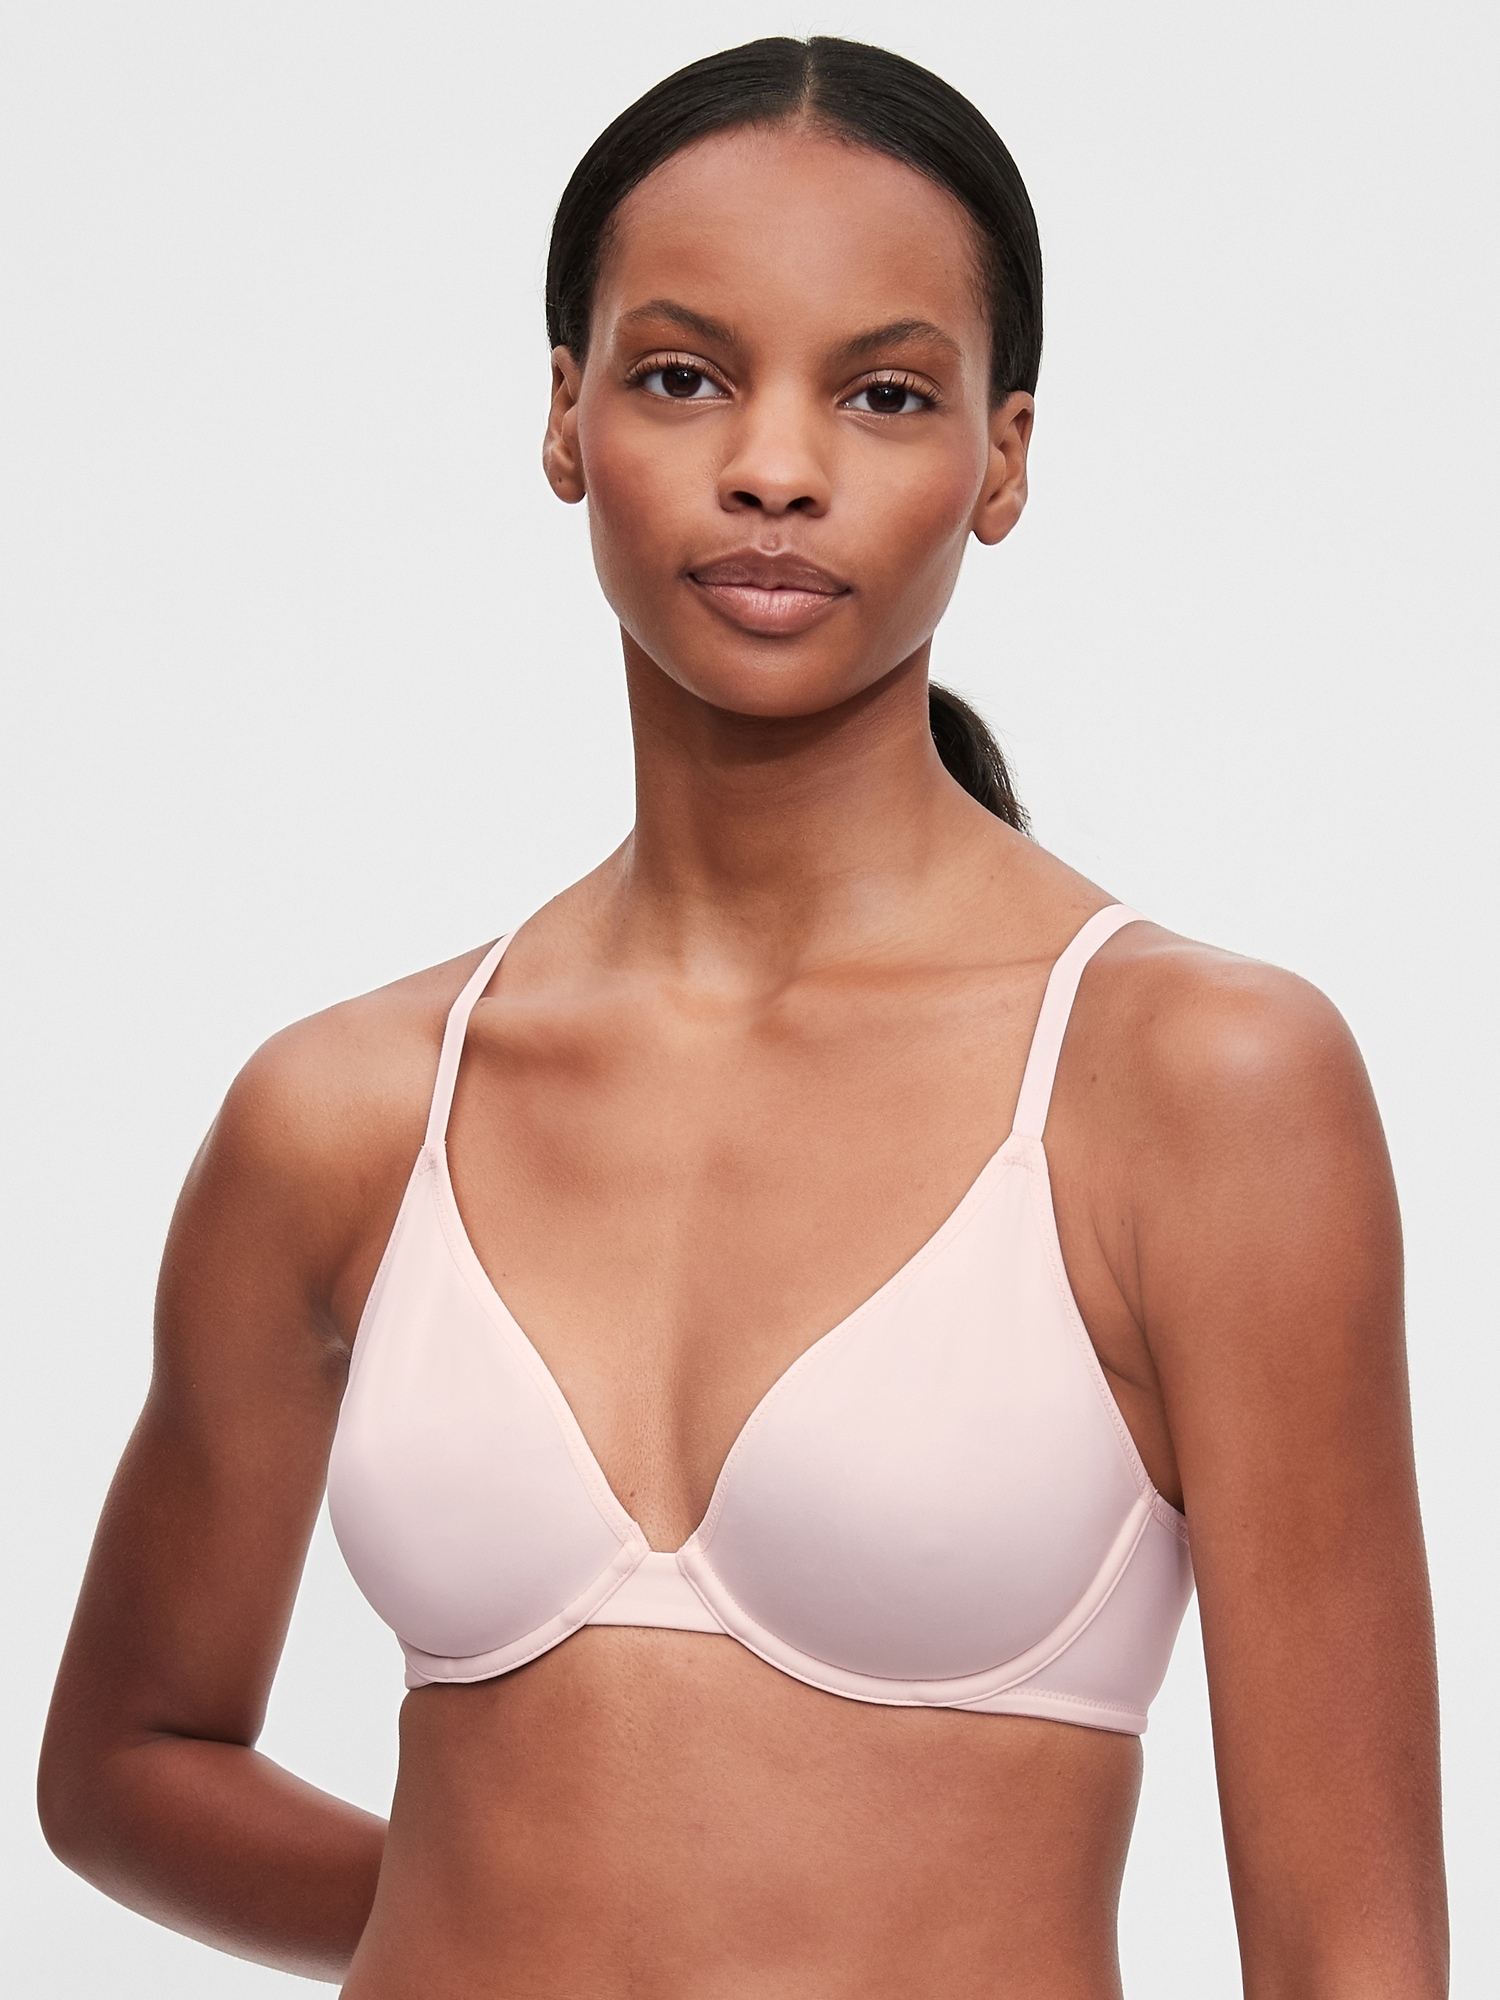 Gap Bare Natural Double-Knit Plunge Bra pink - 593620033